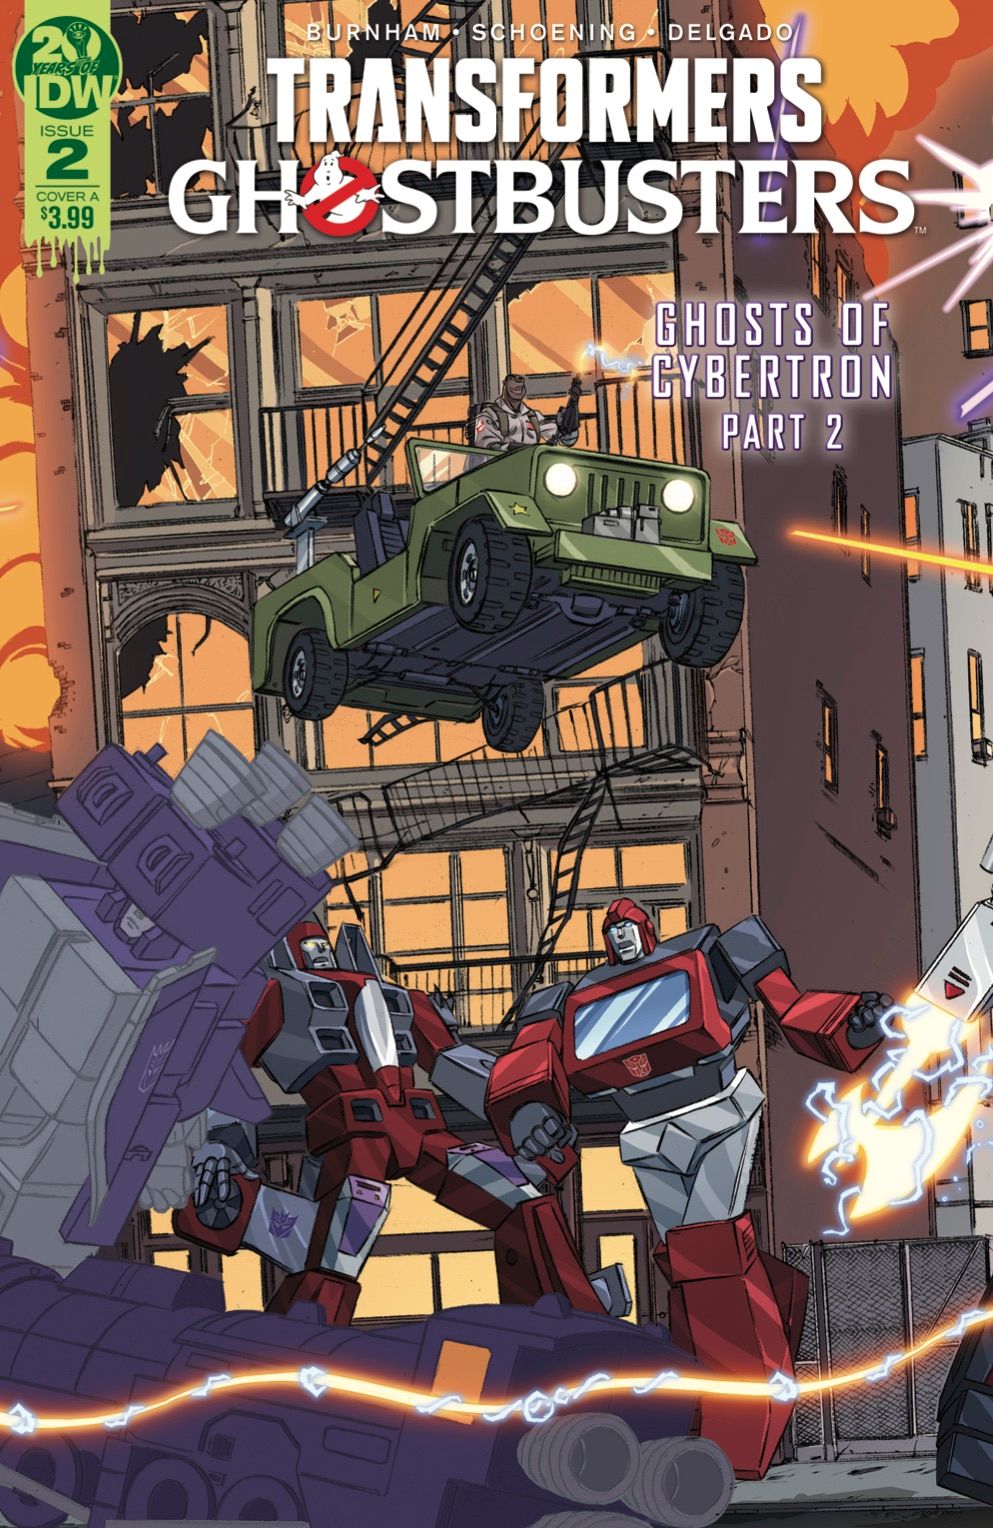 Transformers/Ghostbusters #2 Comic